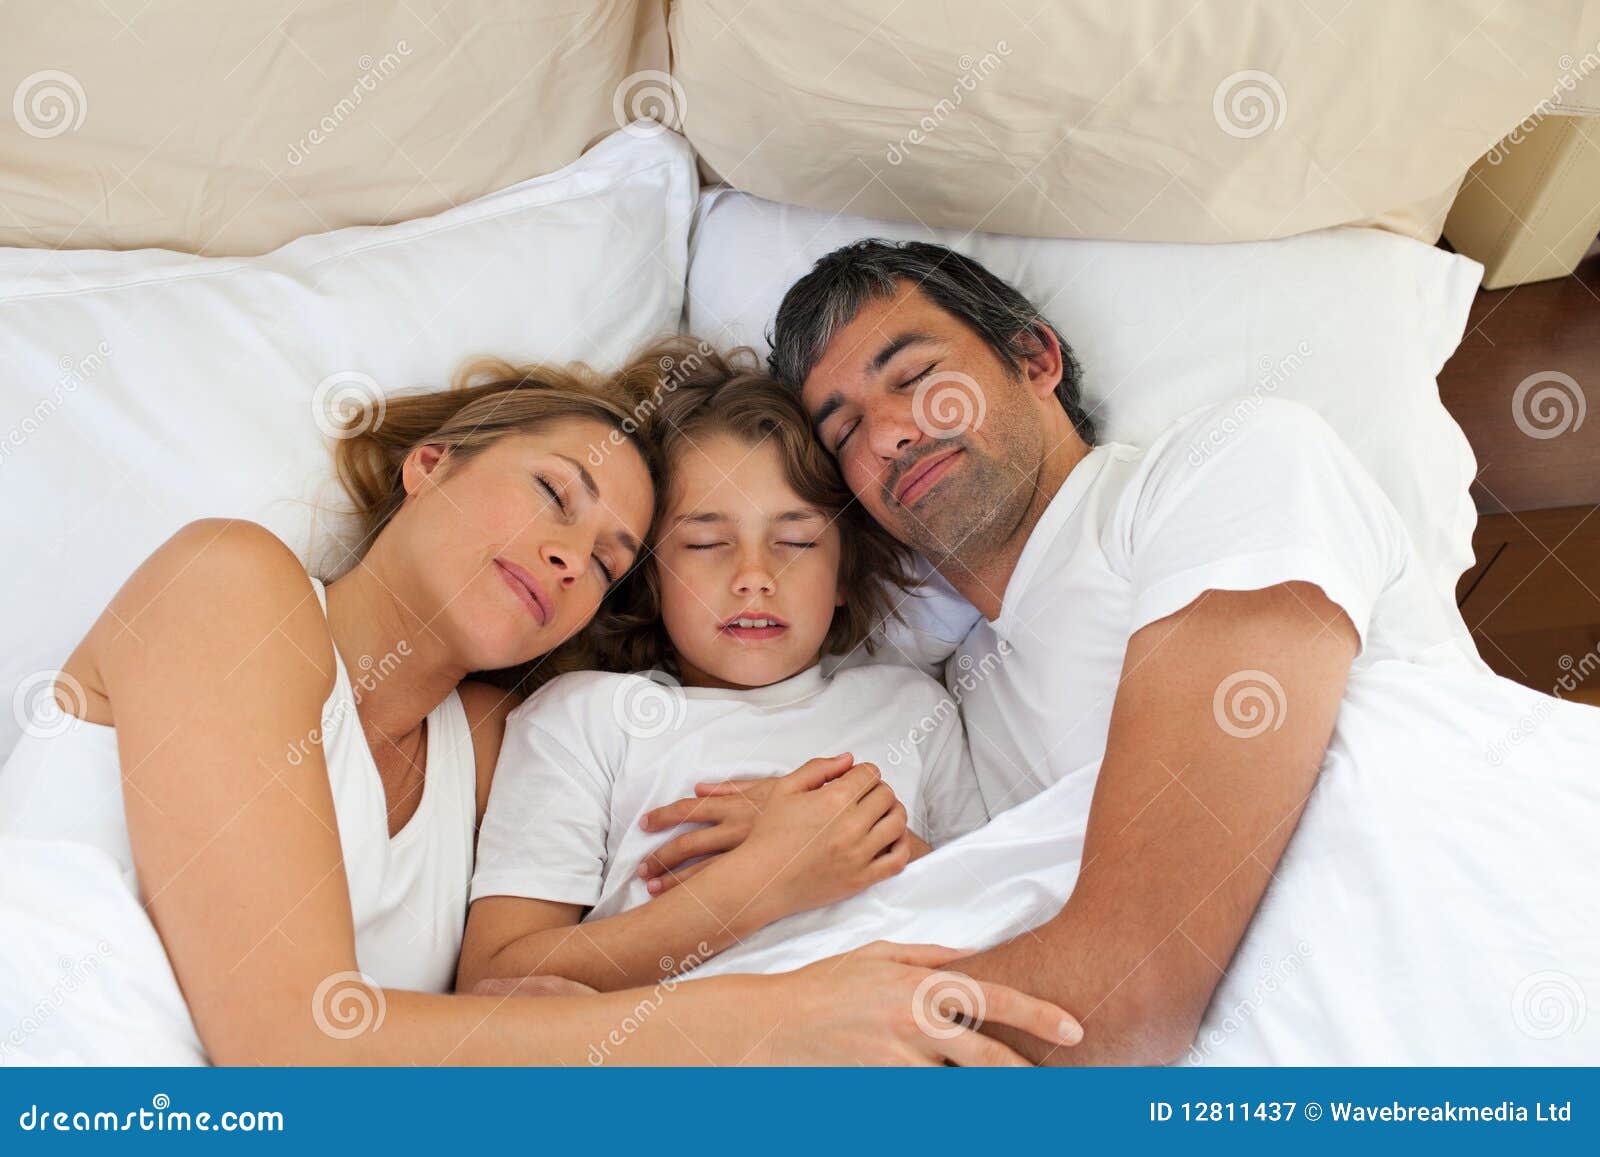 http://thumbs.dreamstime.com/z/cute-child-his-parents-sleeping-together-12811437.jpg